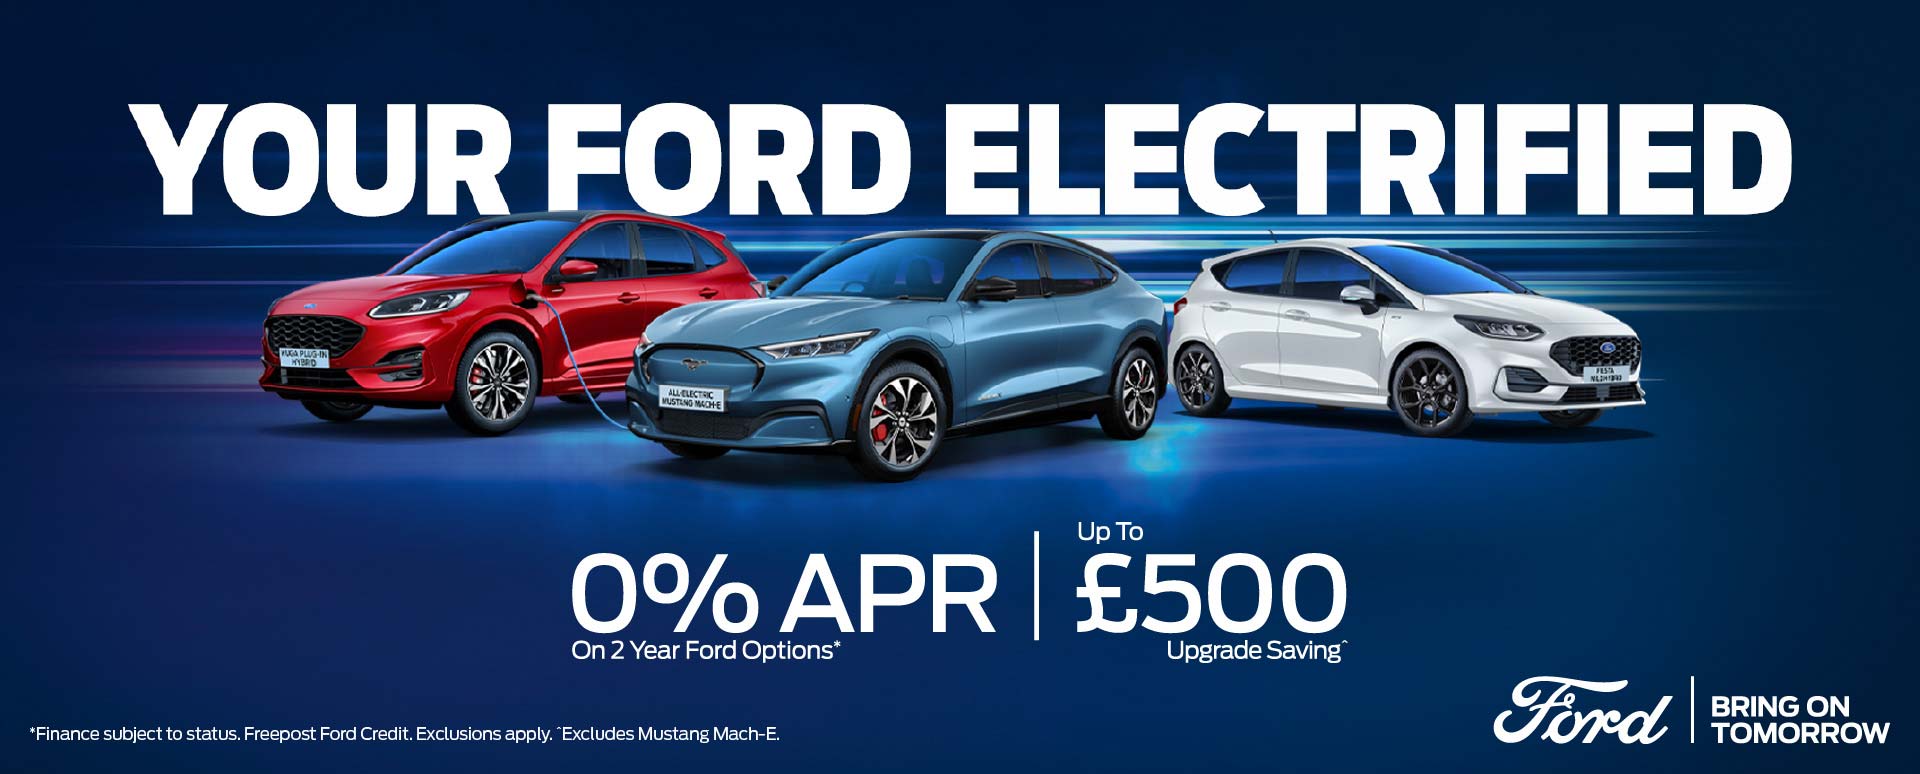 Your Ford Electrified Campaign